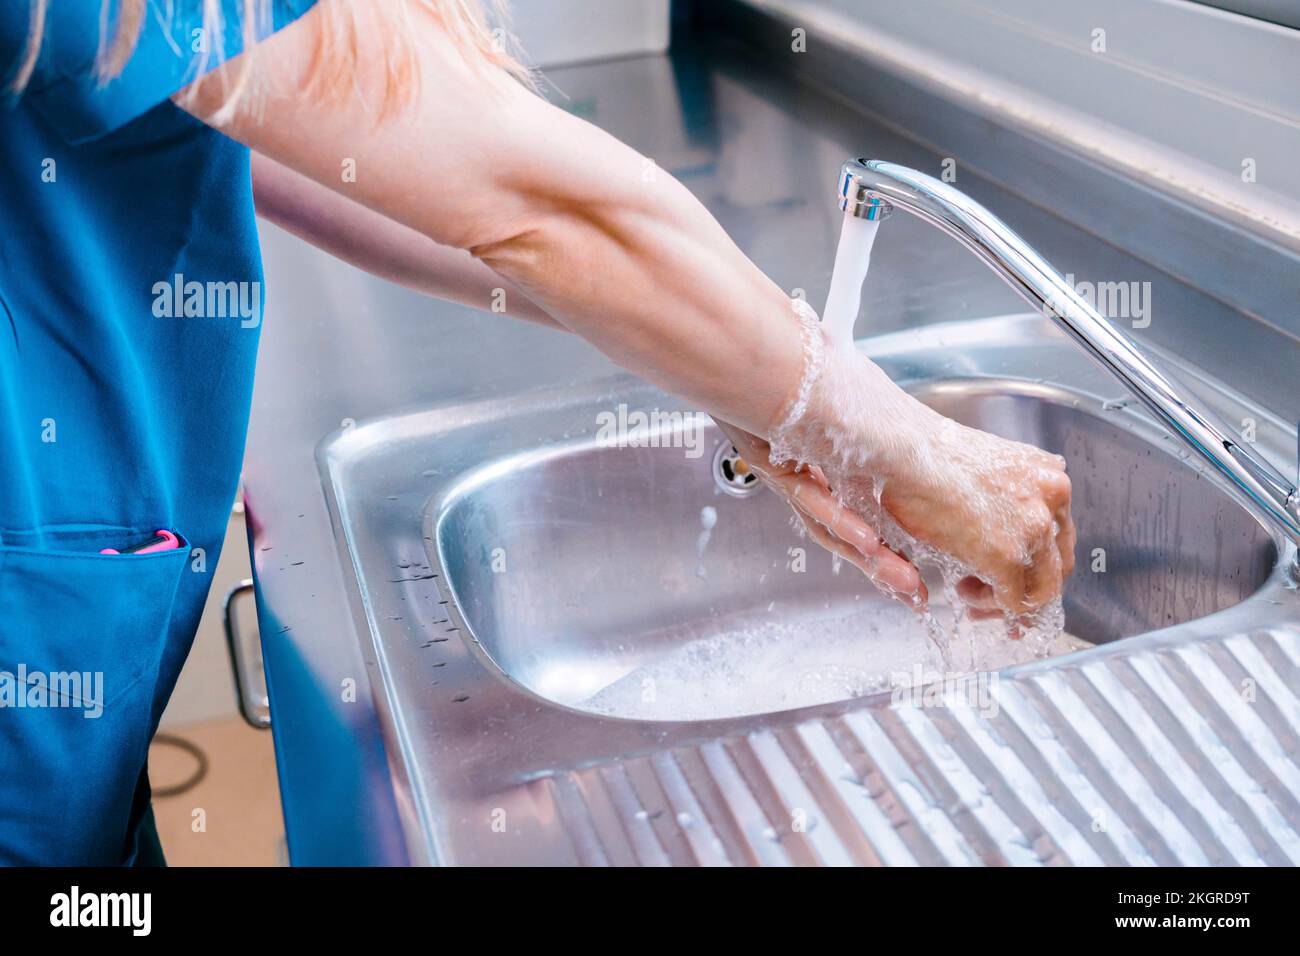 Nurse washing hands with water in sink at hospital Stock Photo